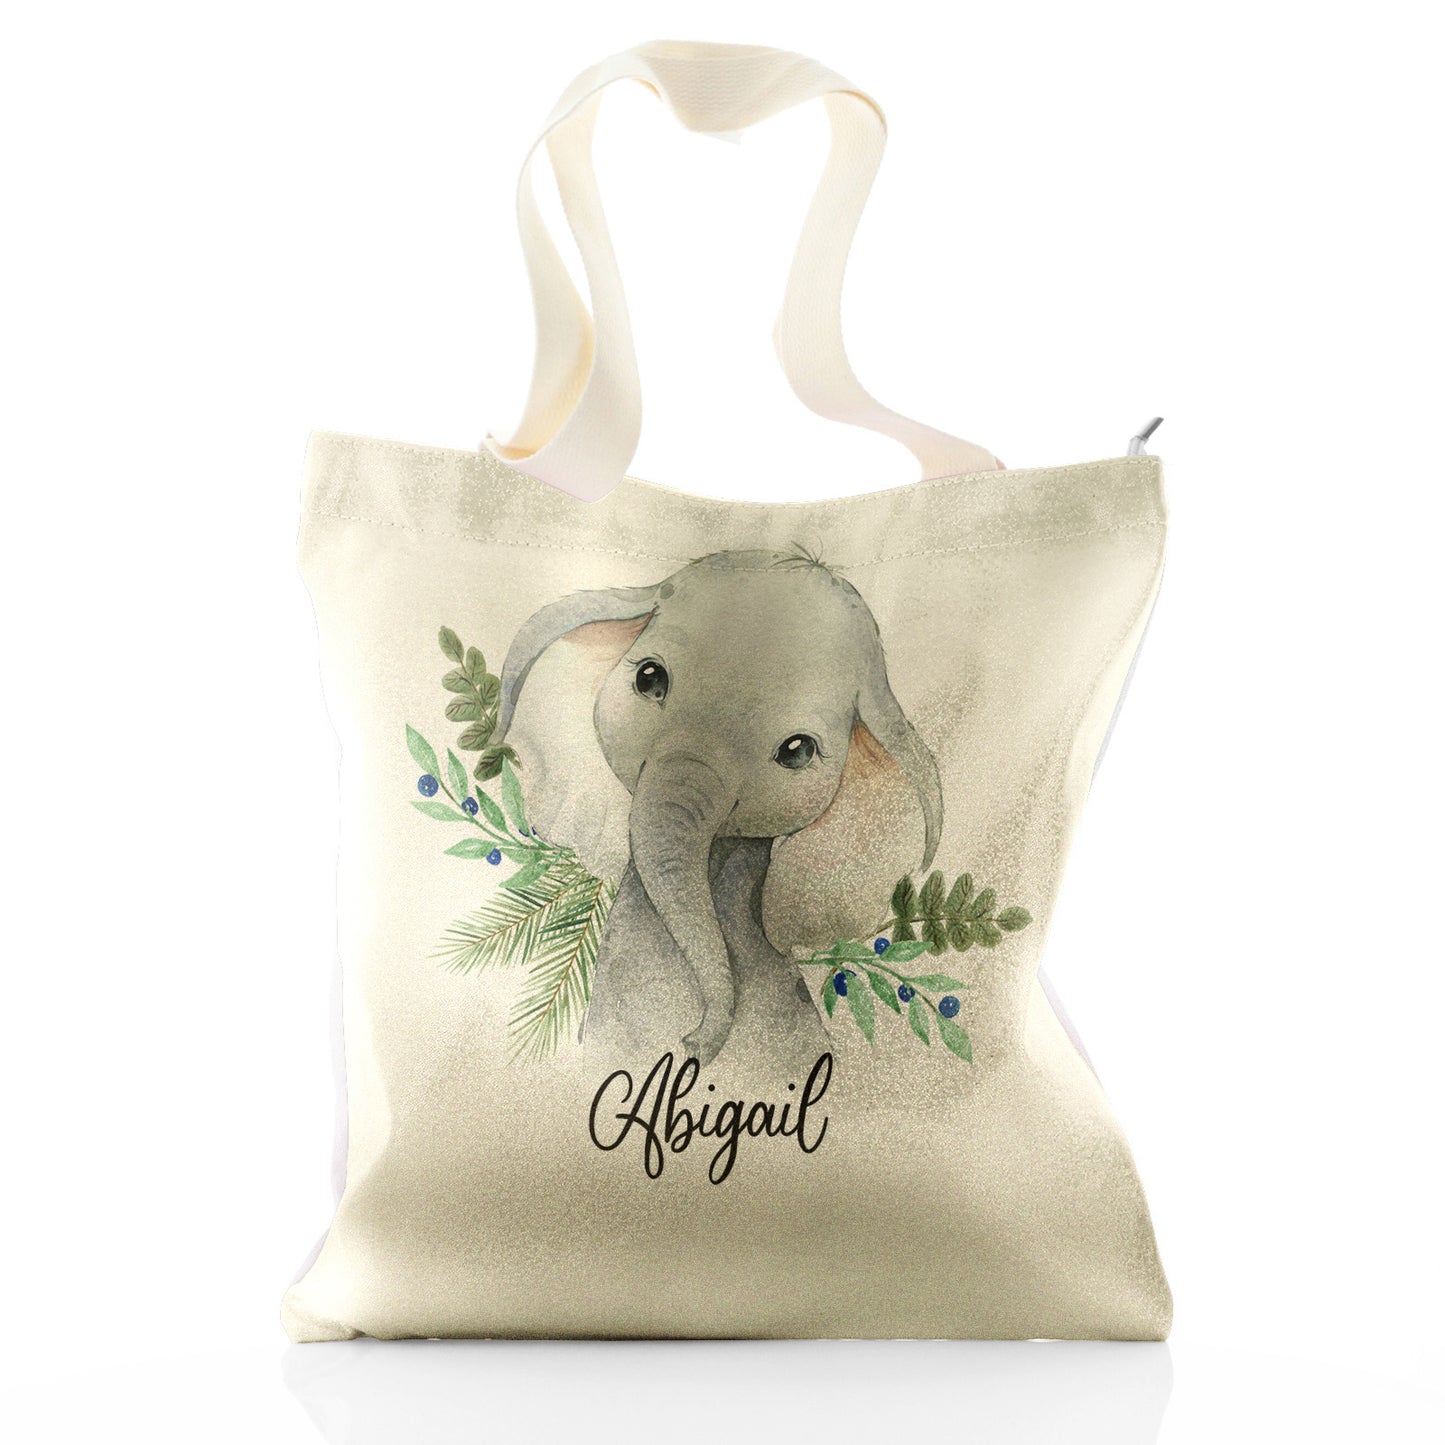 Personalised Glitter Tote Bag with Elephant Blue Berries and Cute Text